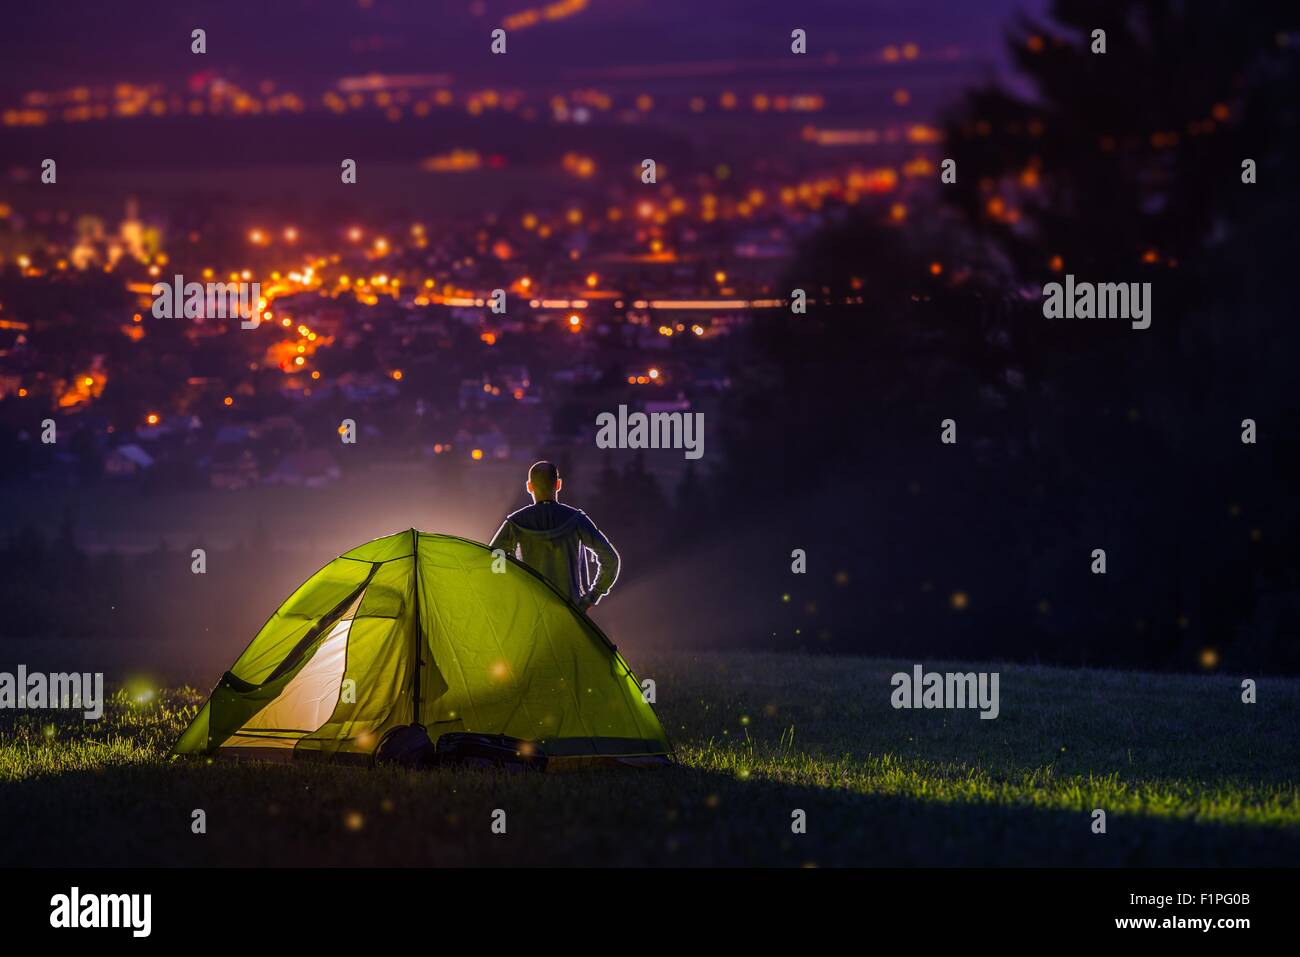 Countryside Camping with Scenic City View Down the Valley. Illuminated Cityscape at Night and the Camper with Illuminated Tent. Stock Photo